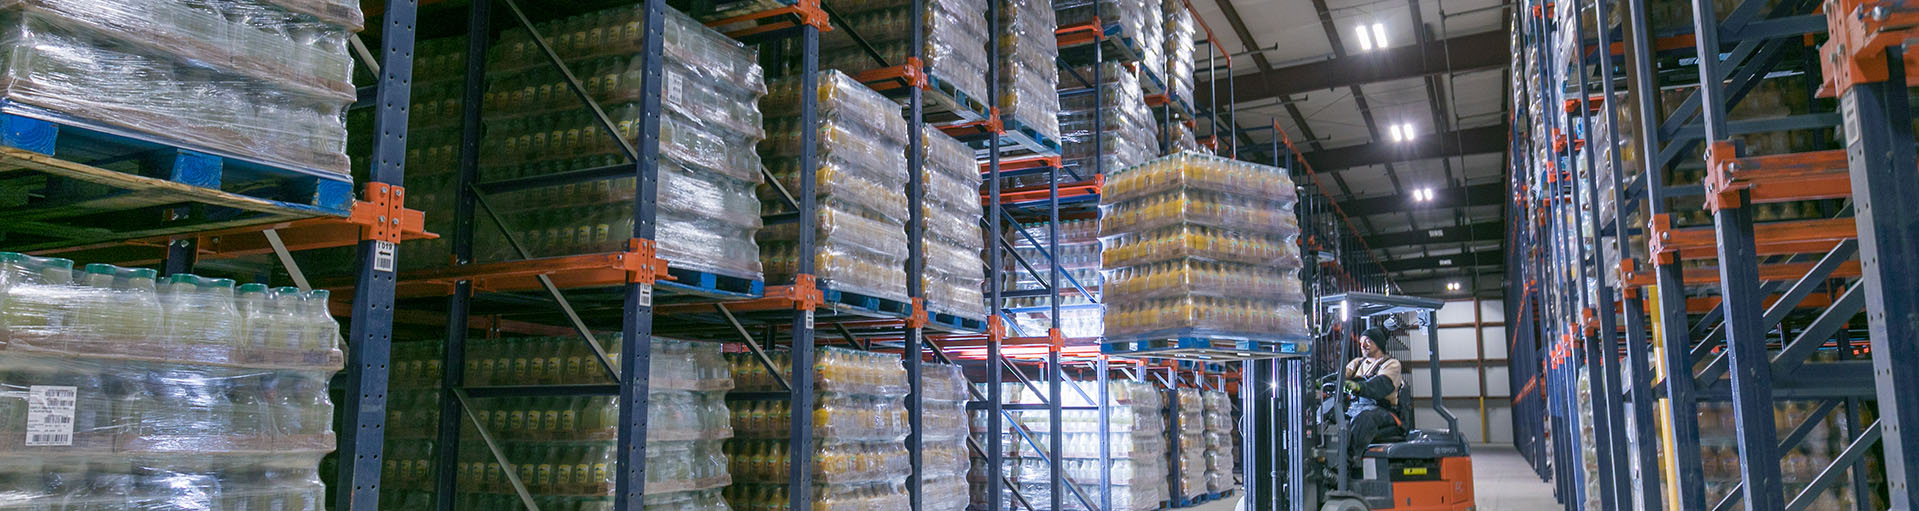 What Is a Contract Warehouse and How Is It Beneficial? - CWI Logistics